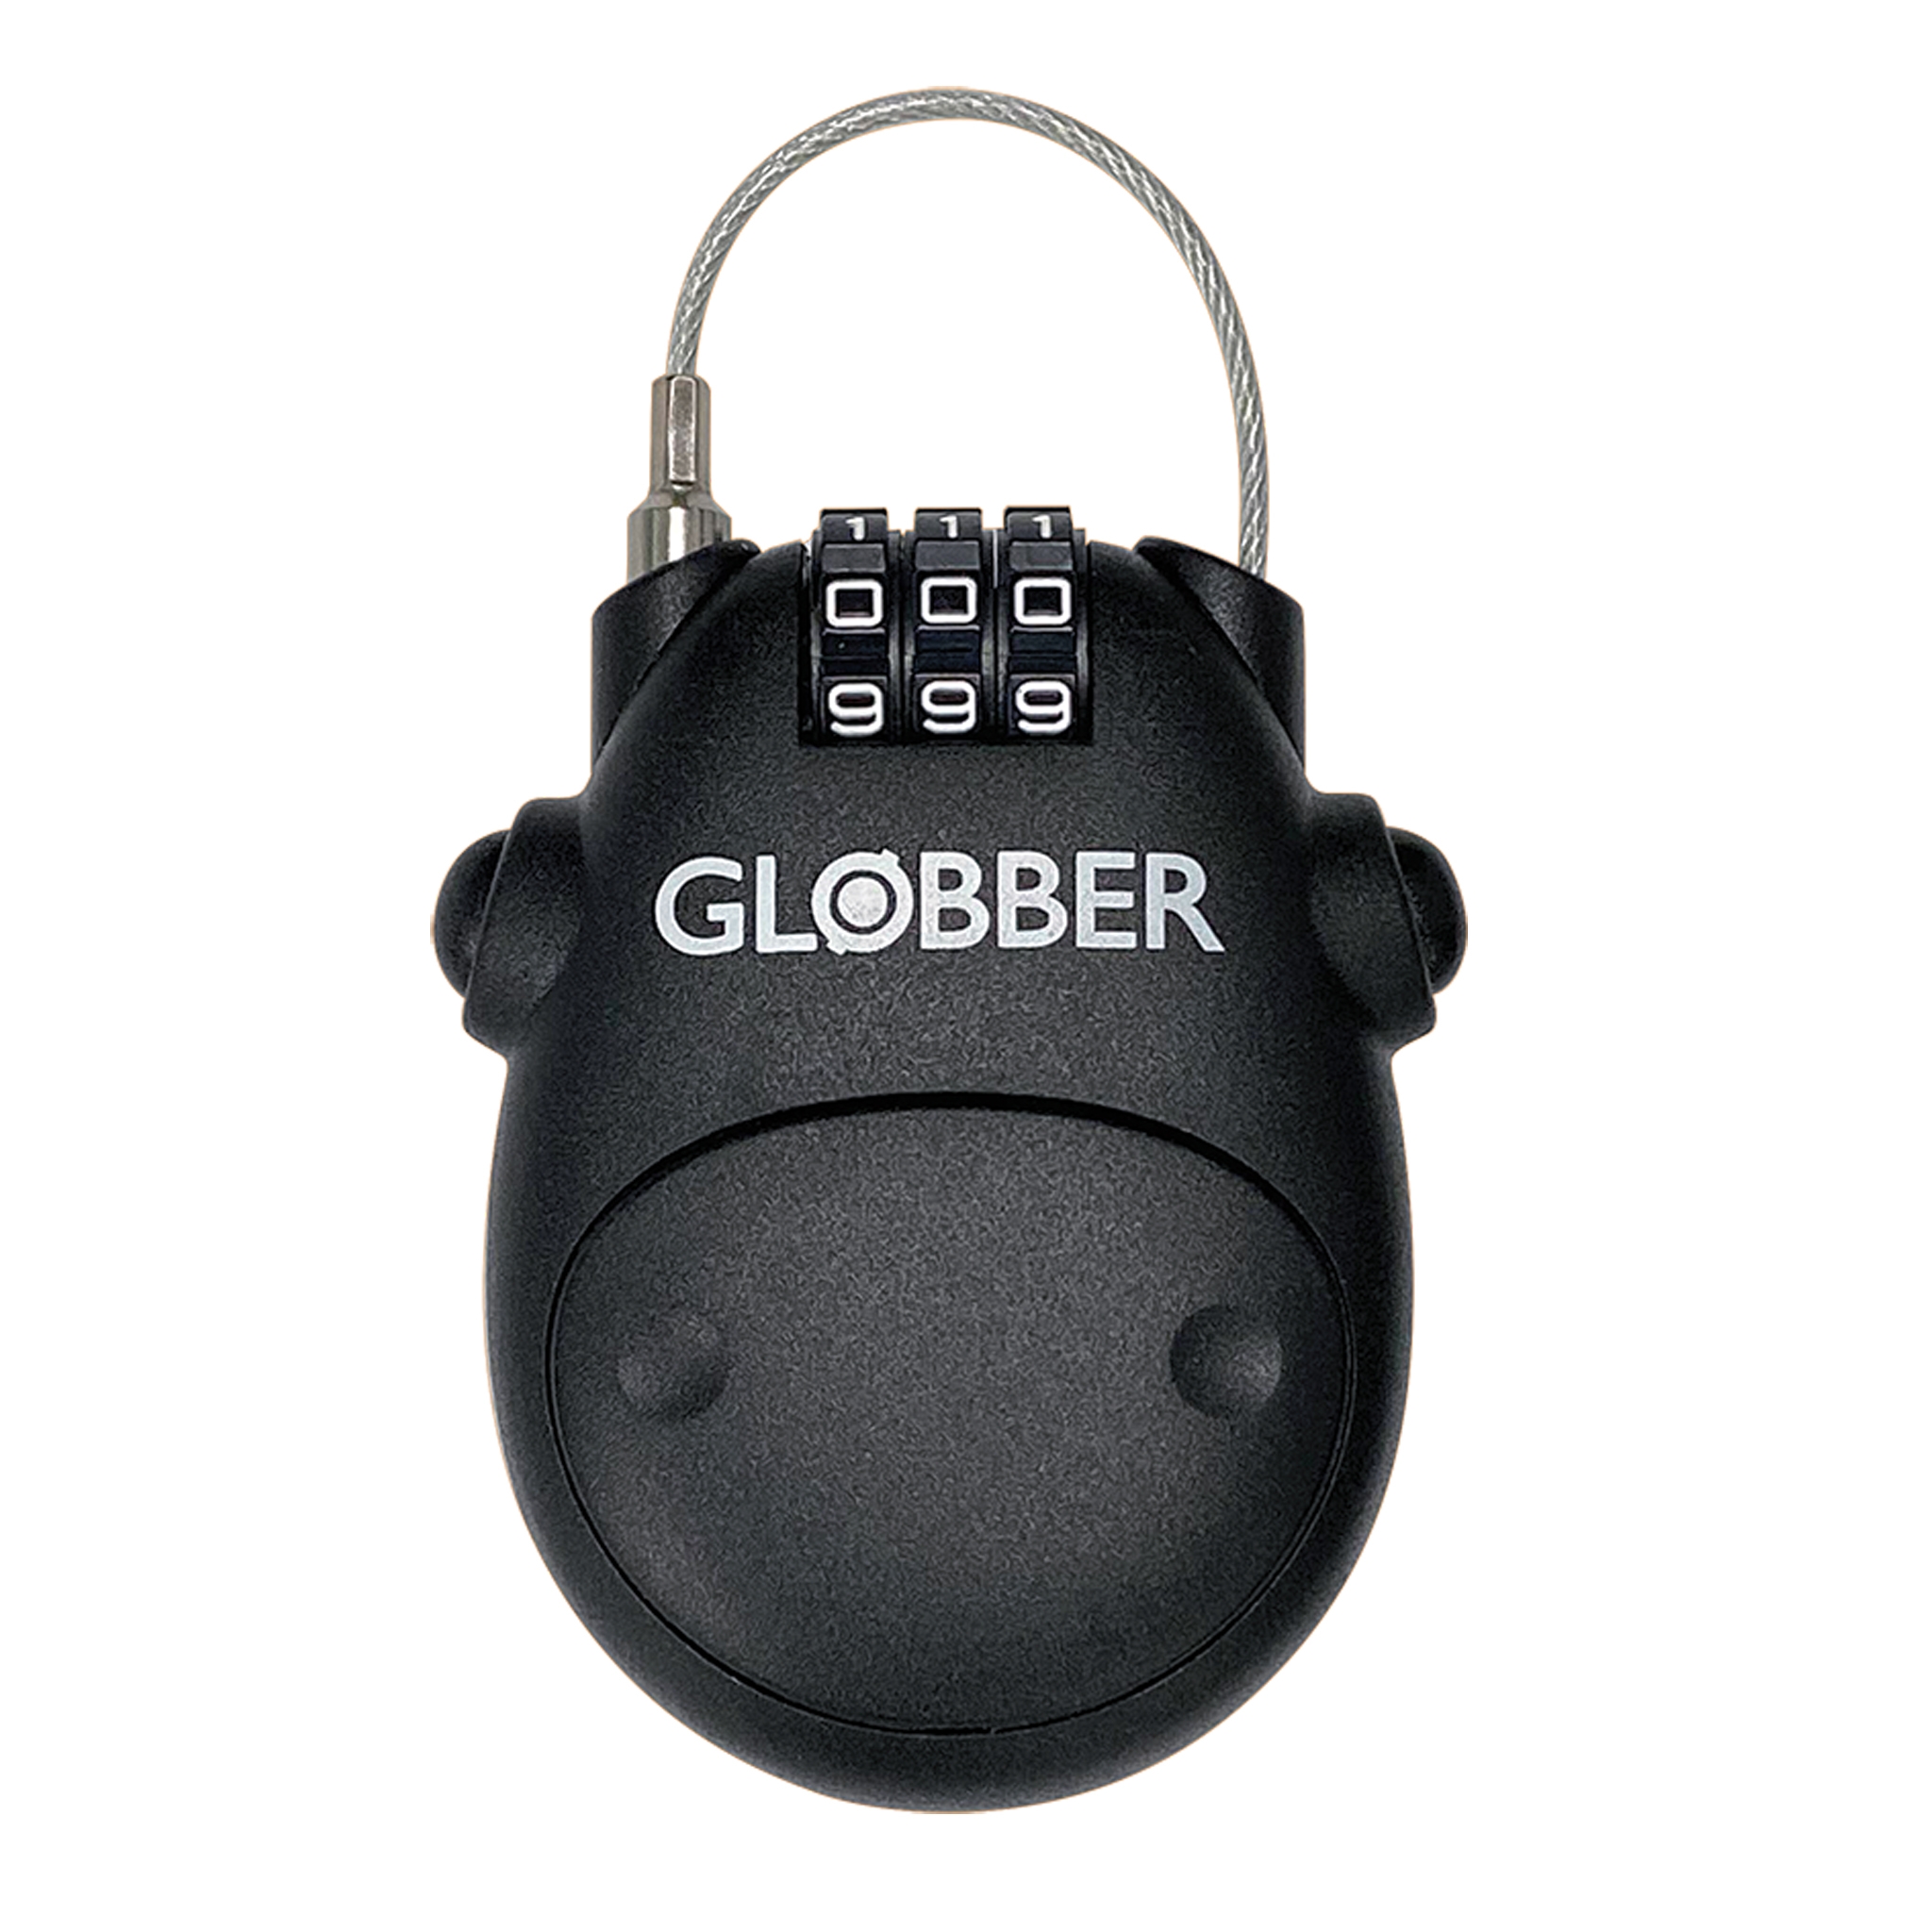 GLOBBER_LOCK-robust-and-ergonomic-designed-universal-lock-with-steel-cable_black 0